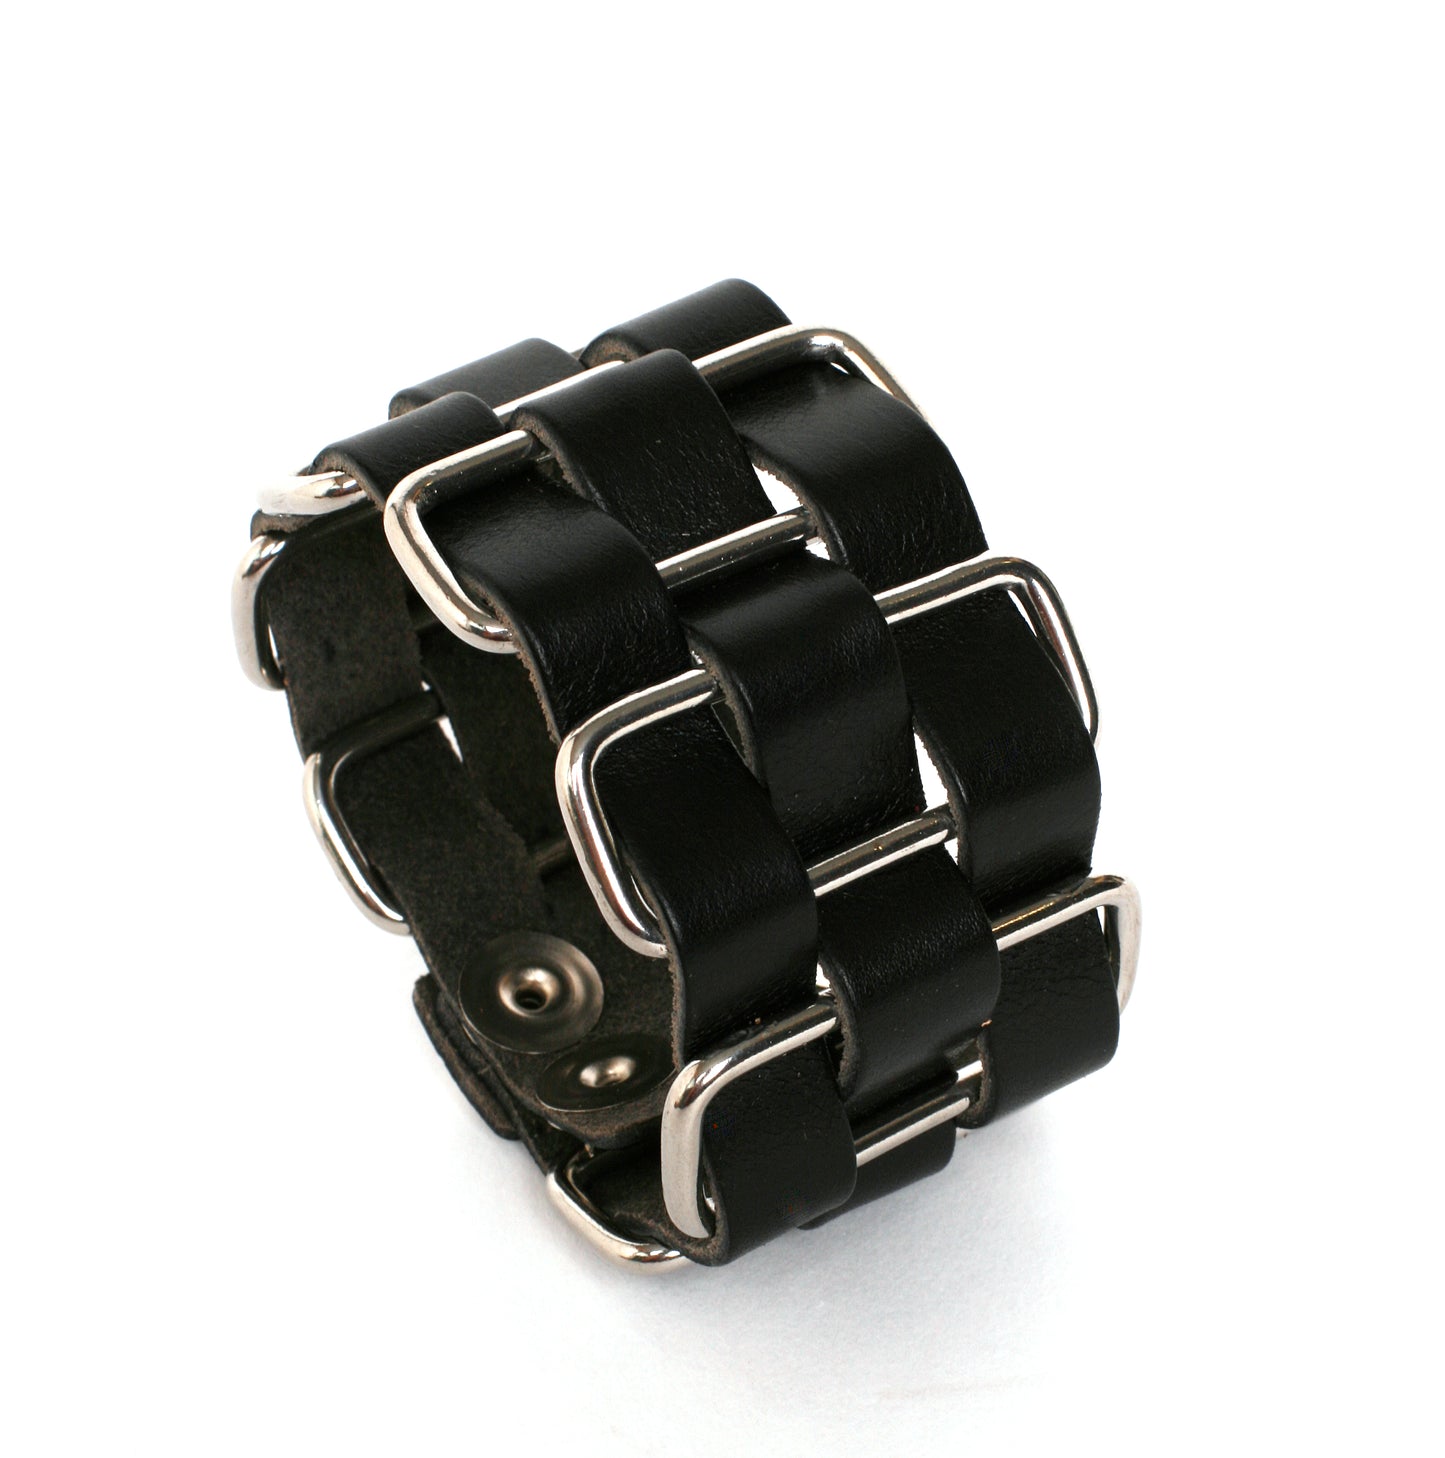 Cholo stainless-steel cuff